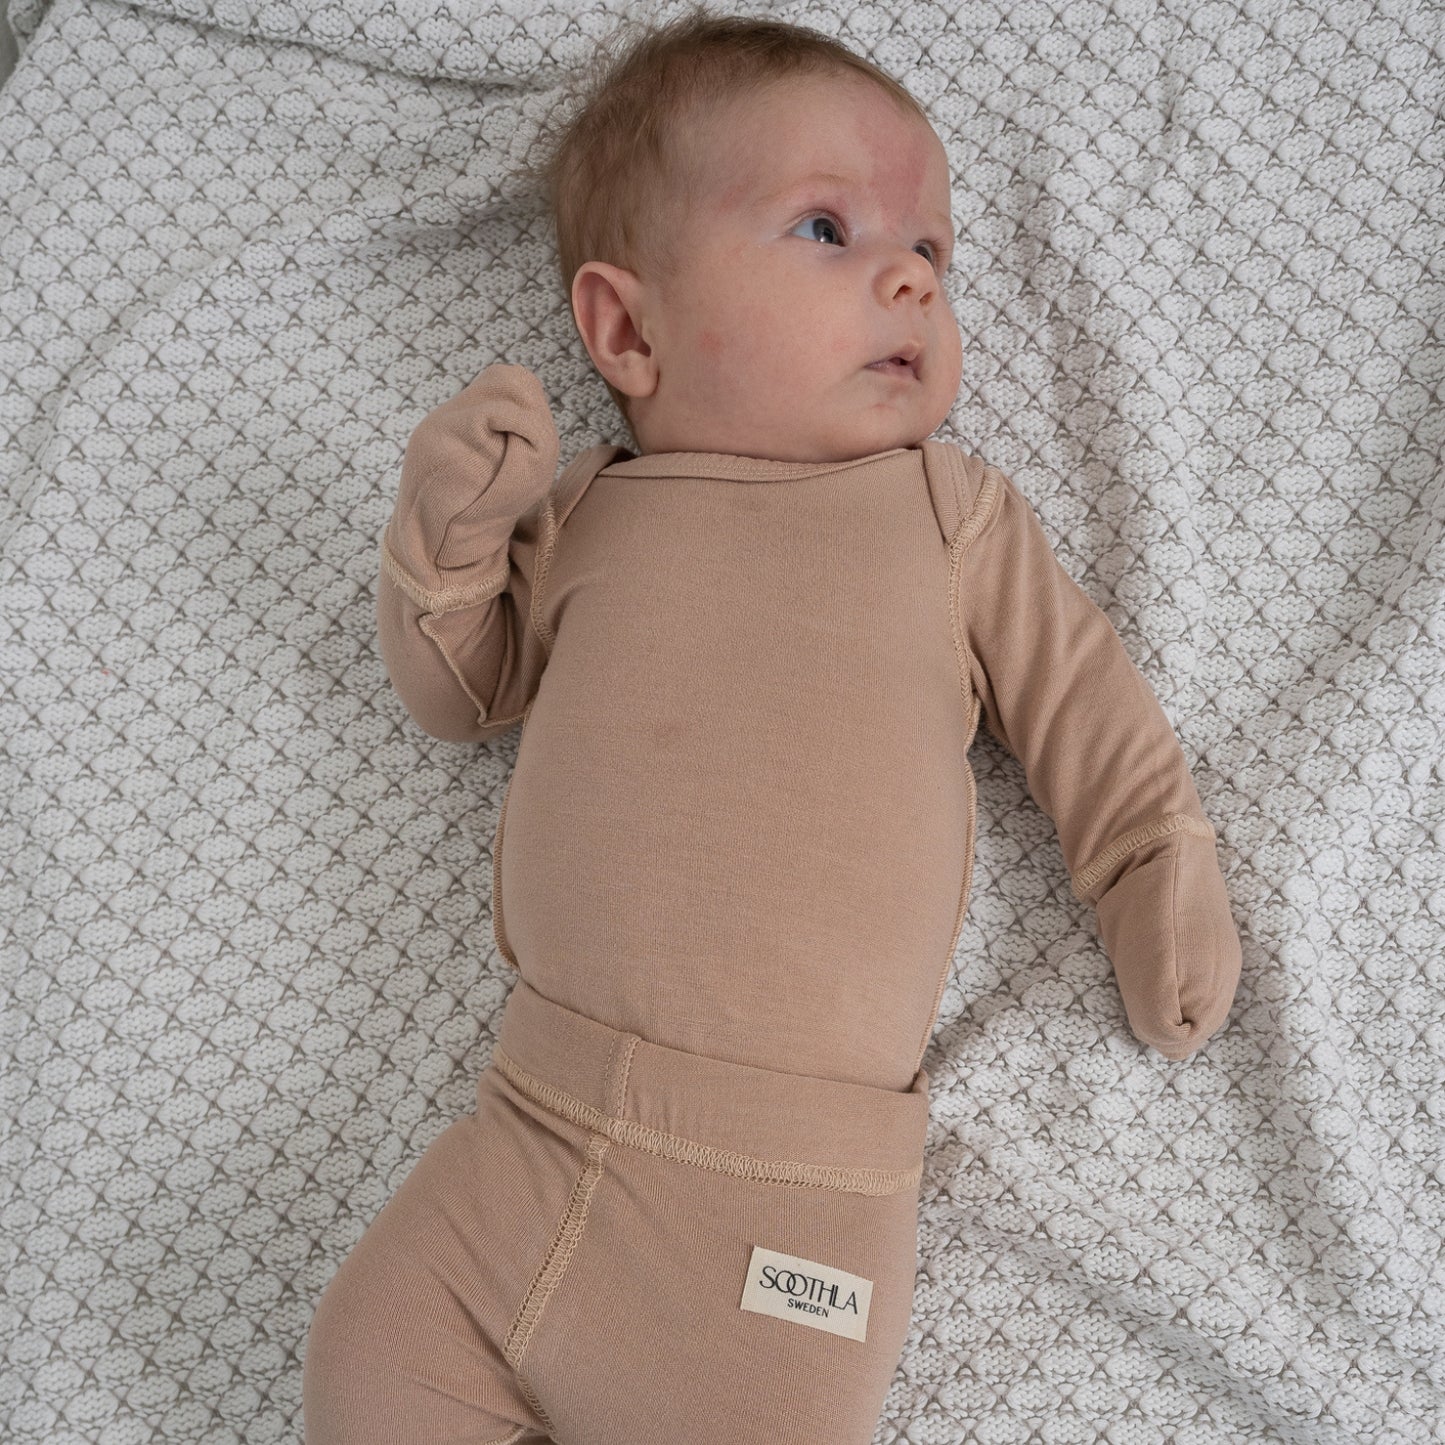 Baby With Eczema On Face Wearing Mahogany Rose Baby Bodysuit And Legging From SOOTHLA.